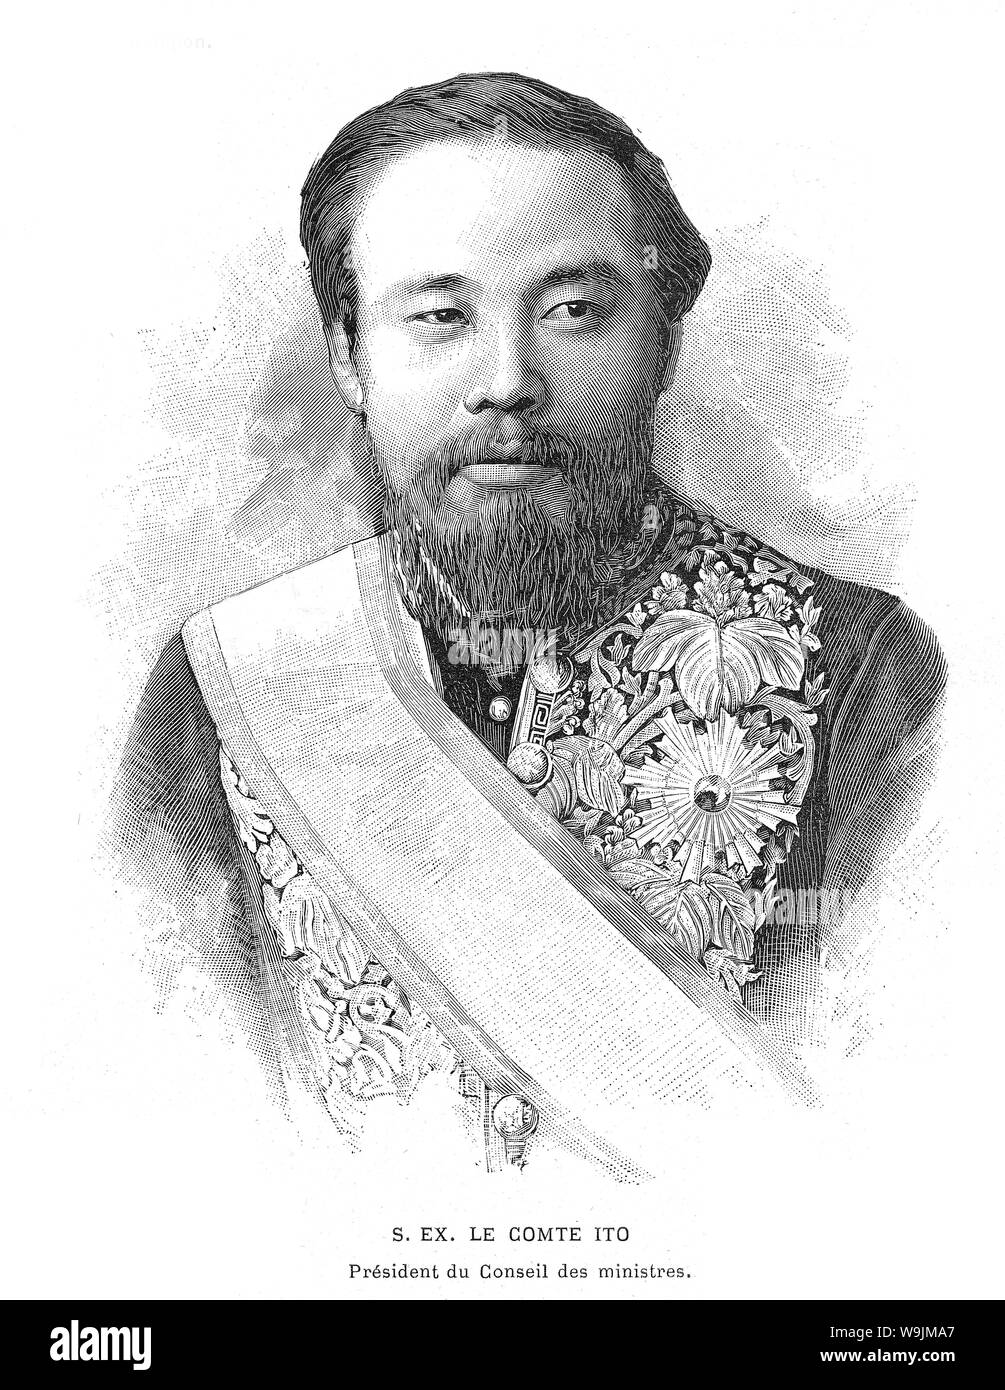 [ 1890s Japan - Japanese Statesman Hirobumi Ito ] —   Portrait of Japanese statesman Hirobumi Ito (伊藤博文, 1841–1909). Ito was the 1st, 5th, 7th and 10th Prime Minister of Japan, genro (元老) and Resident-General of Korea. He was assassinated by Korean nationalist An Jung-geun (안중근; 安重根, 1879–1910).  Published in the French illustrated weekly L'Illustration on September 29, 1894 (Meiji 27).  19th century vintage newspaper illustration. Stock Photo